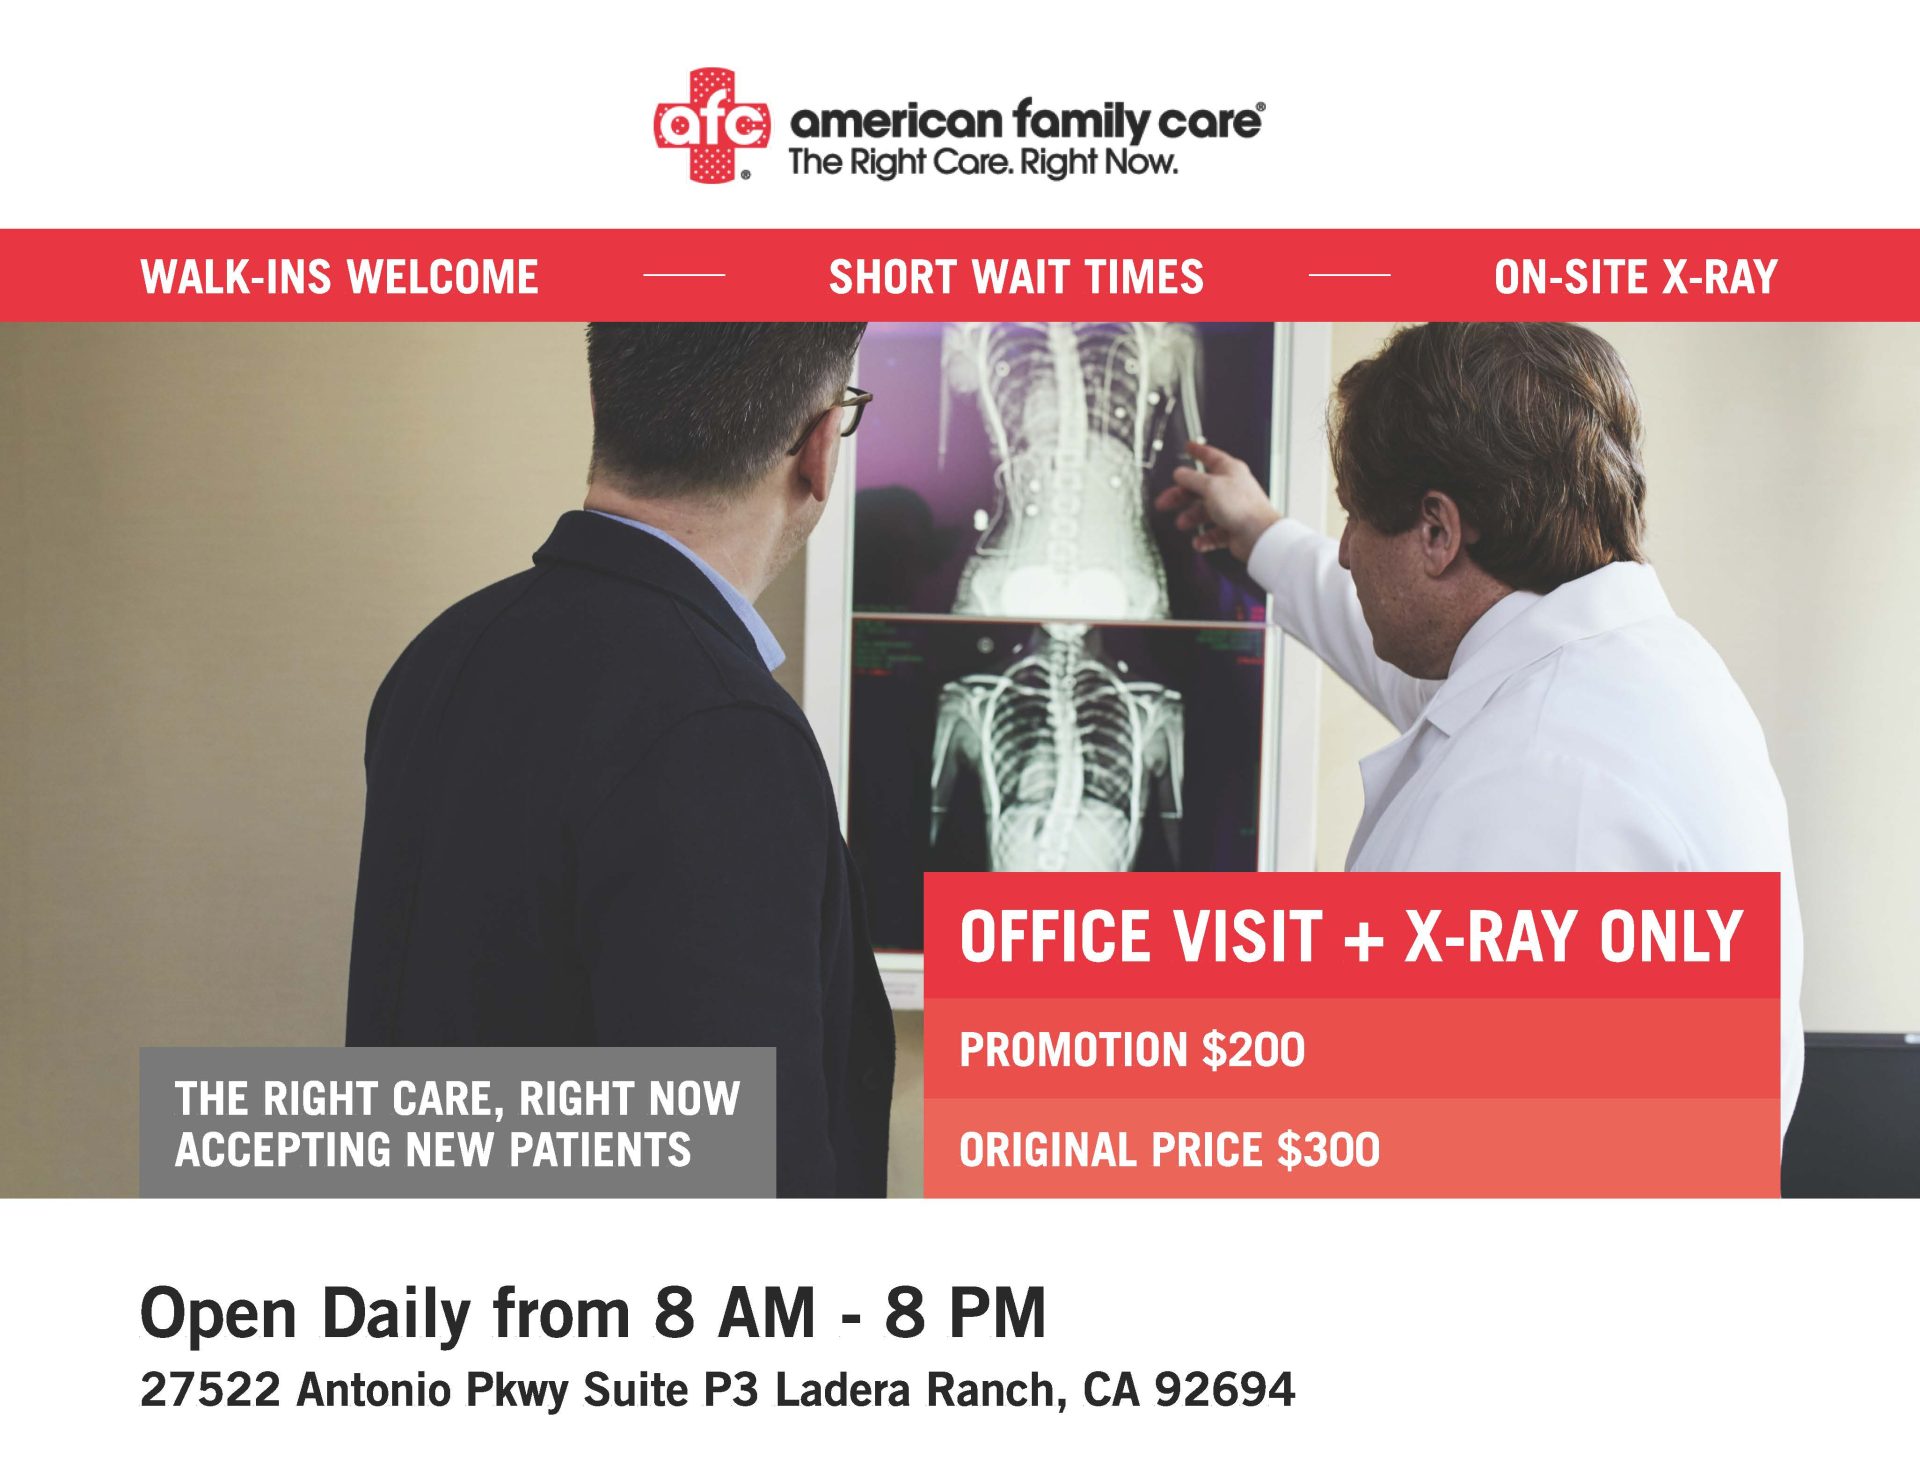 AFC Office Visit + X-Ray Promotion